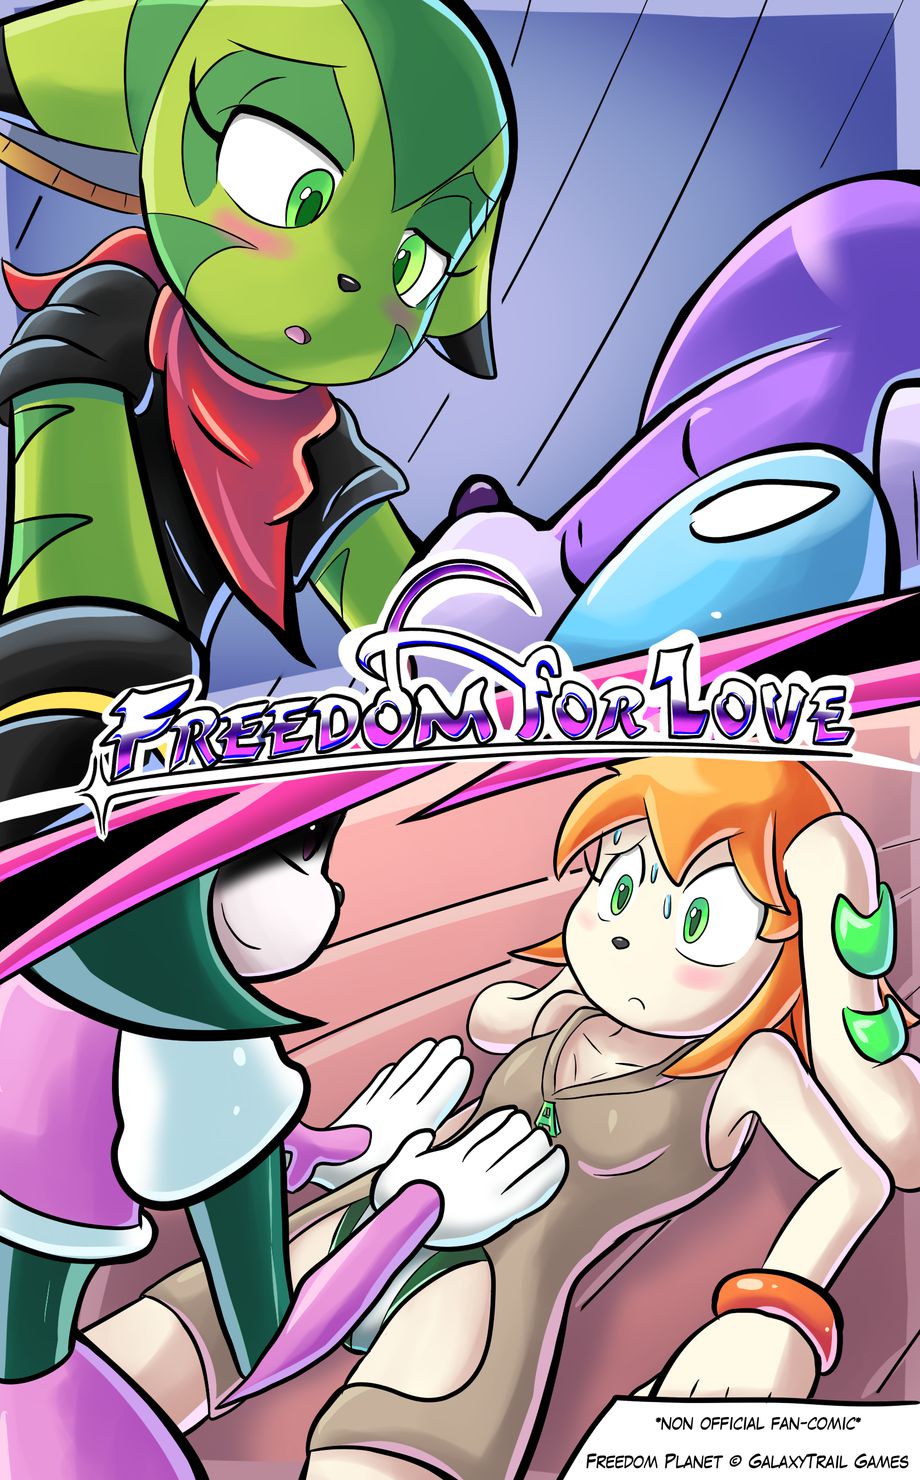 [goshaag] Freedom of Love (Freedom Planet) (ongoing) 1